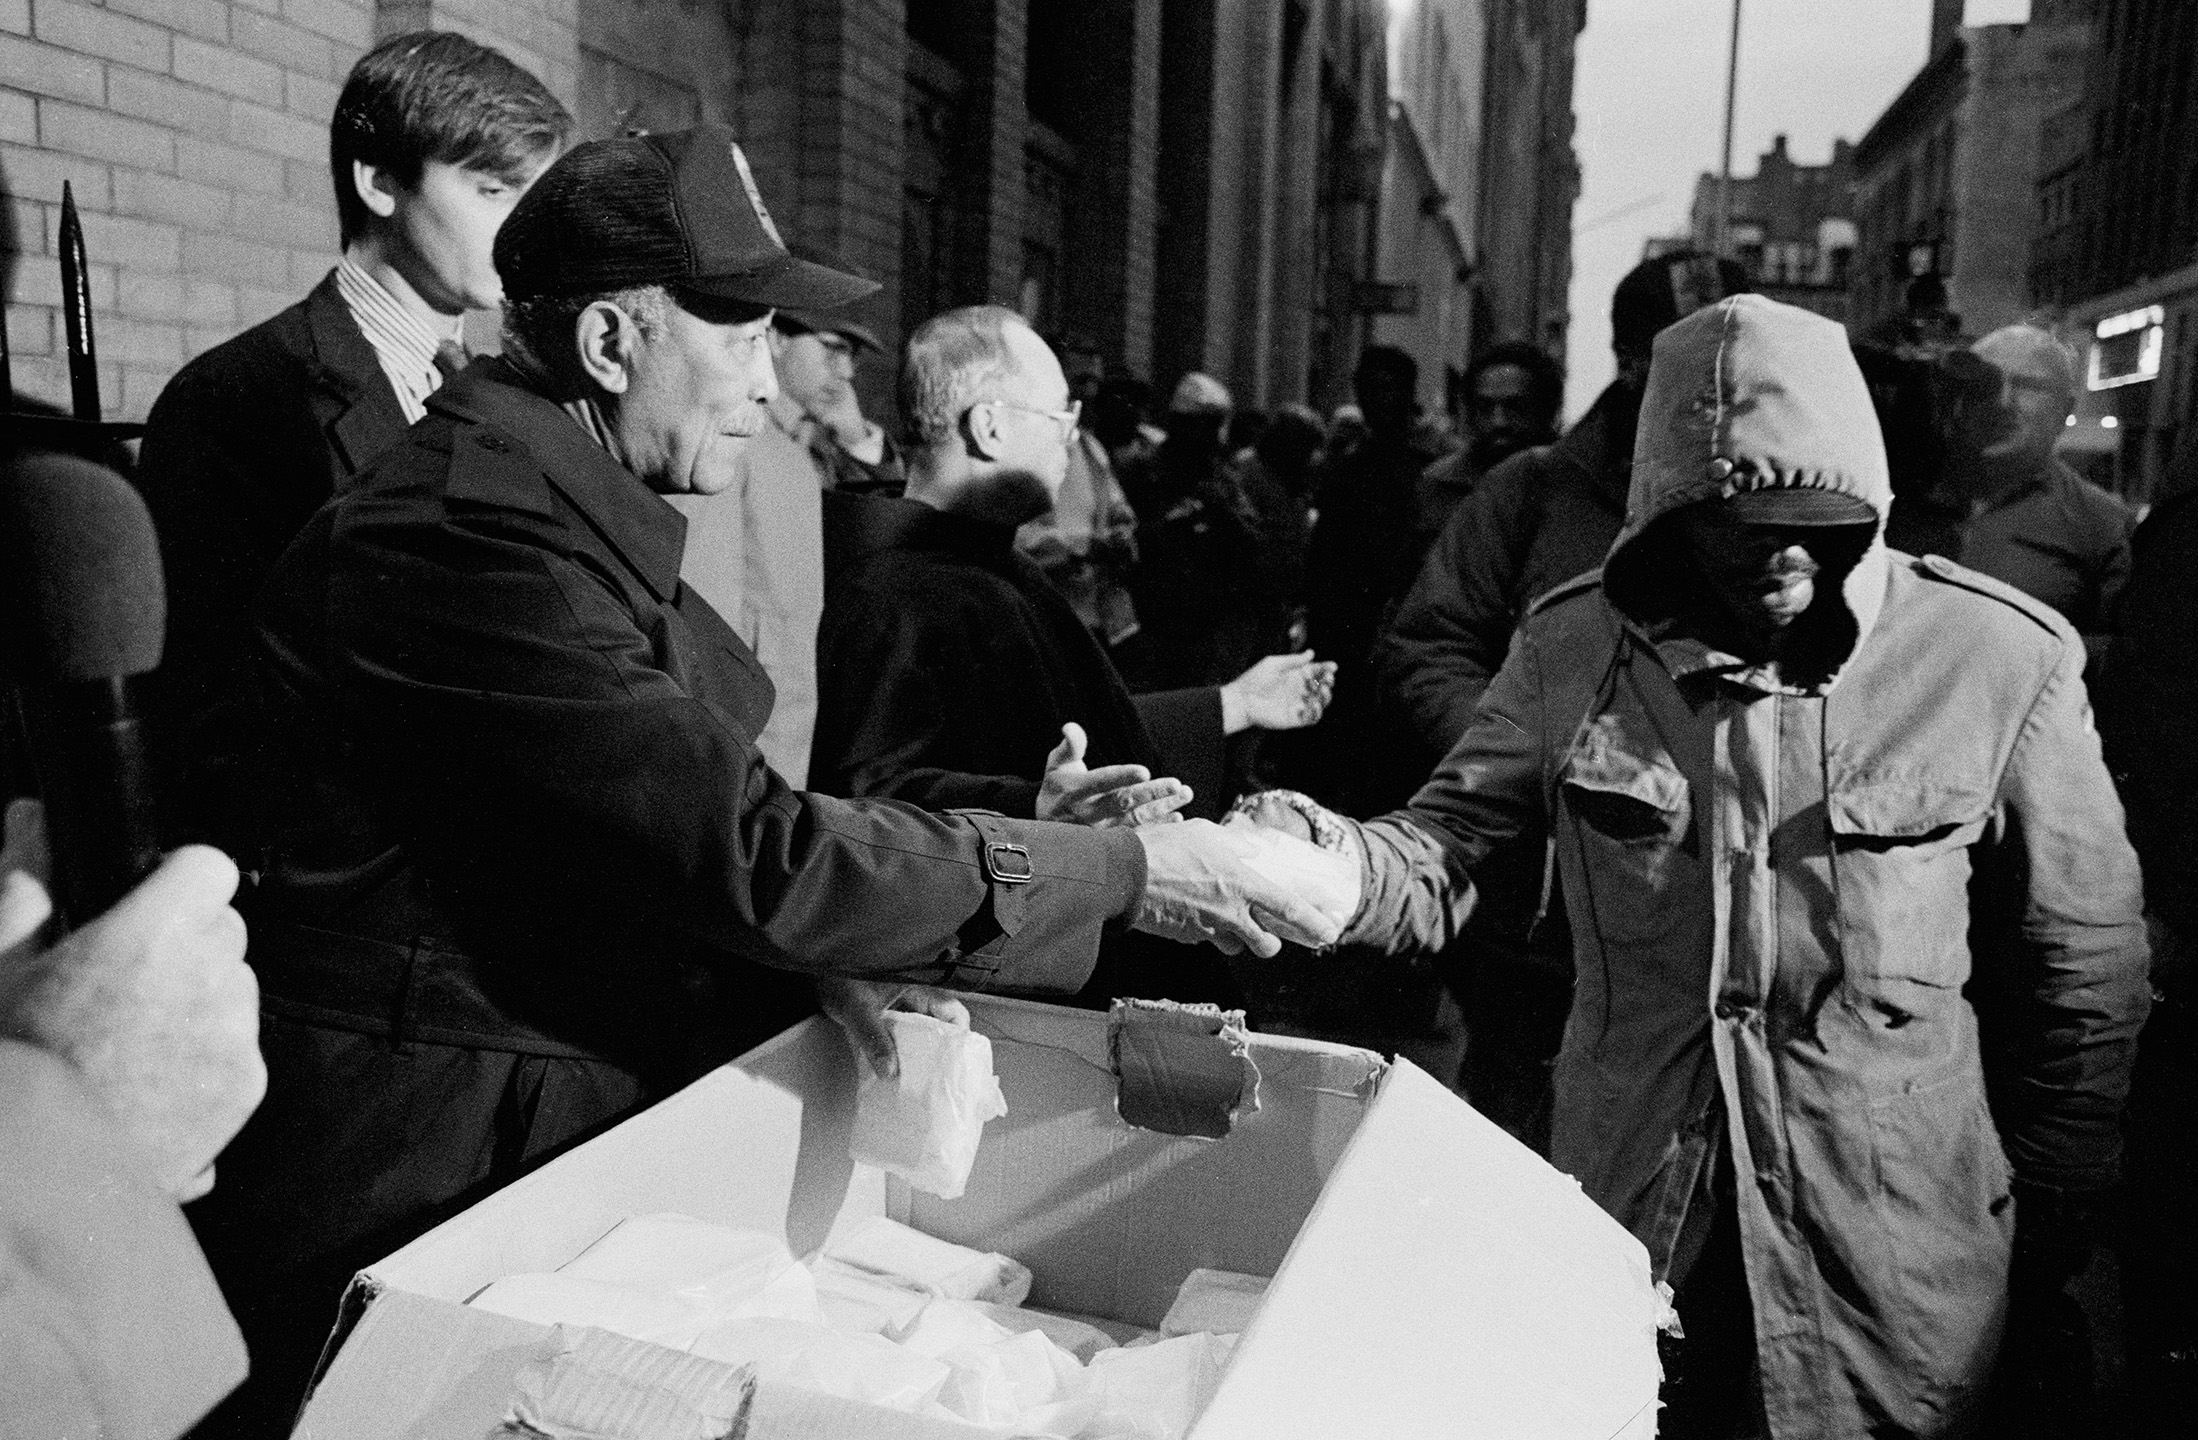 Mayor Dinkins distributes food to the homeless, December 13, 1991